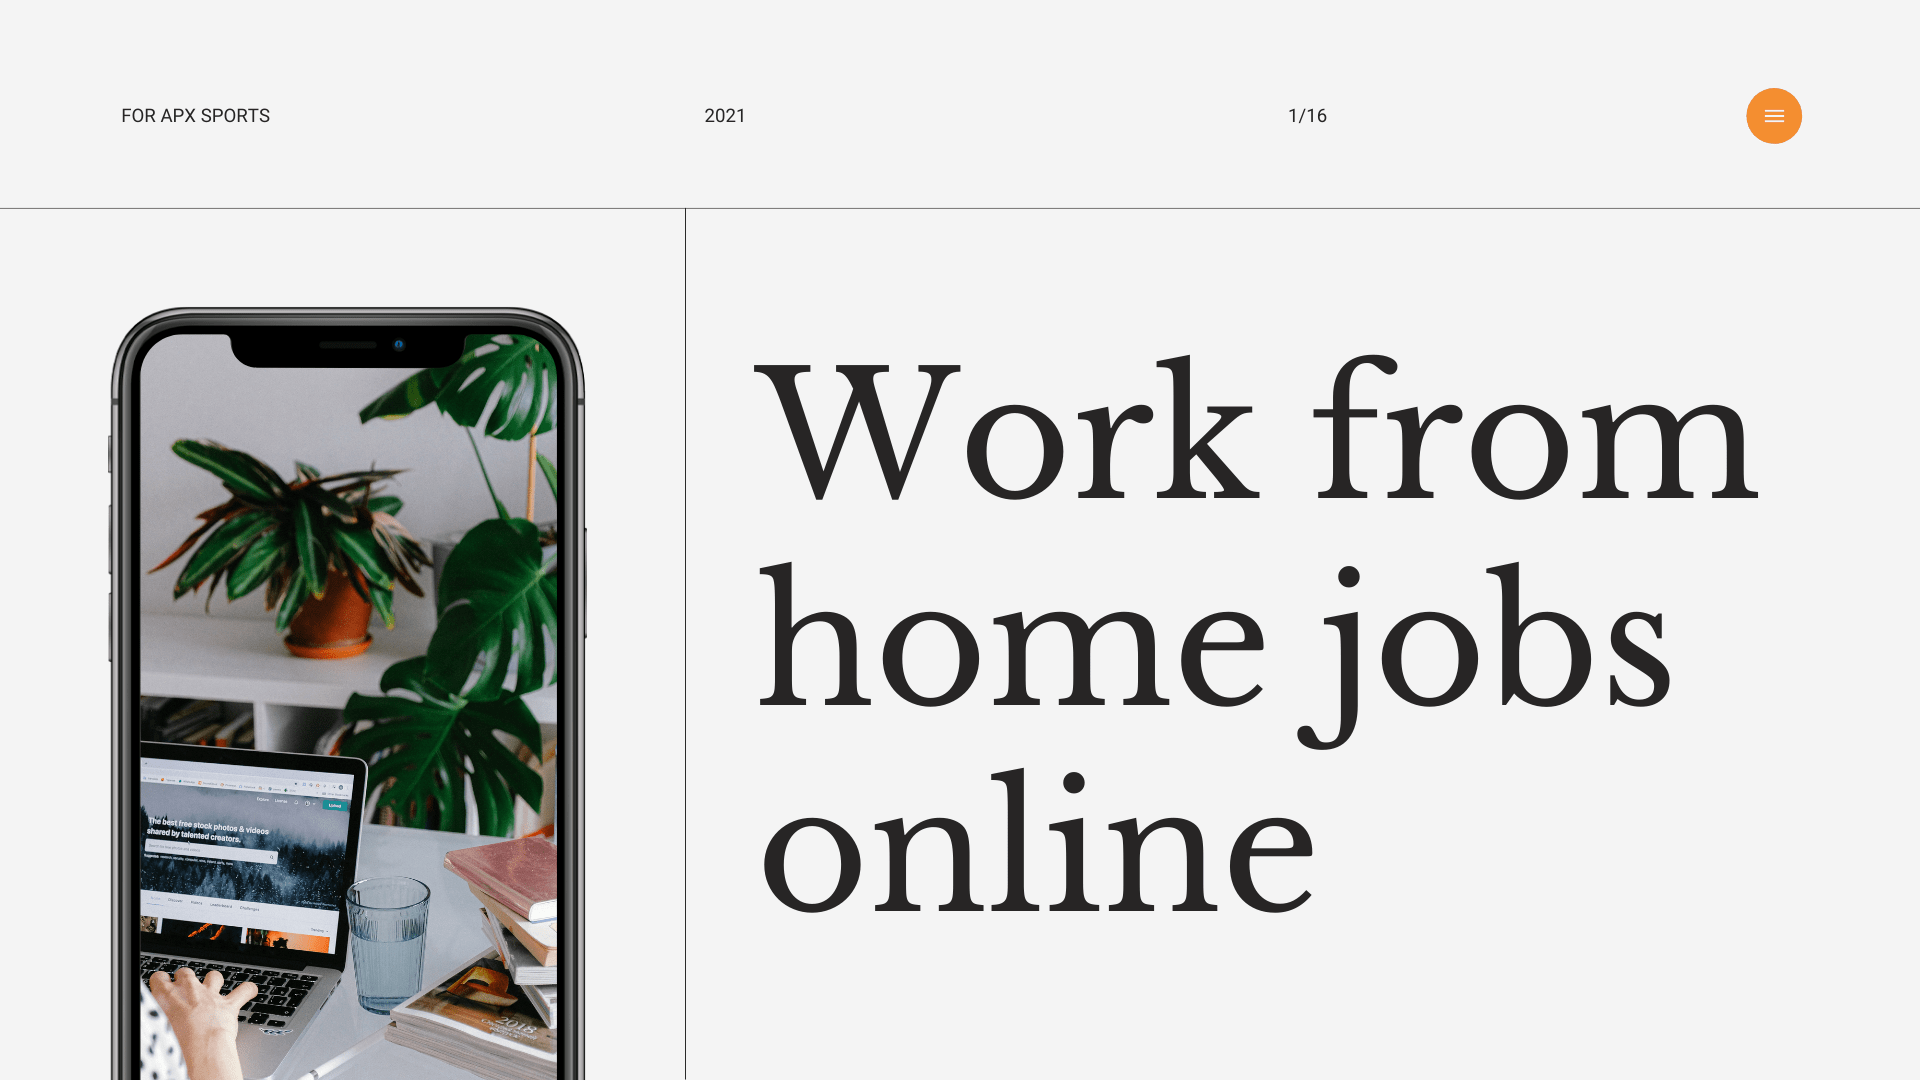 The image is a graphic related to Work From Home Jobs Online.